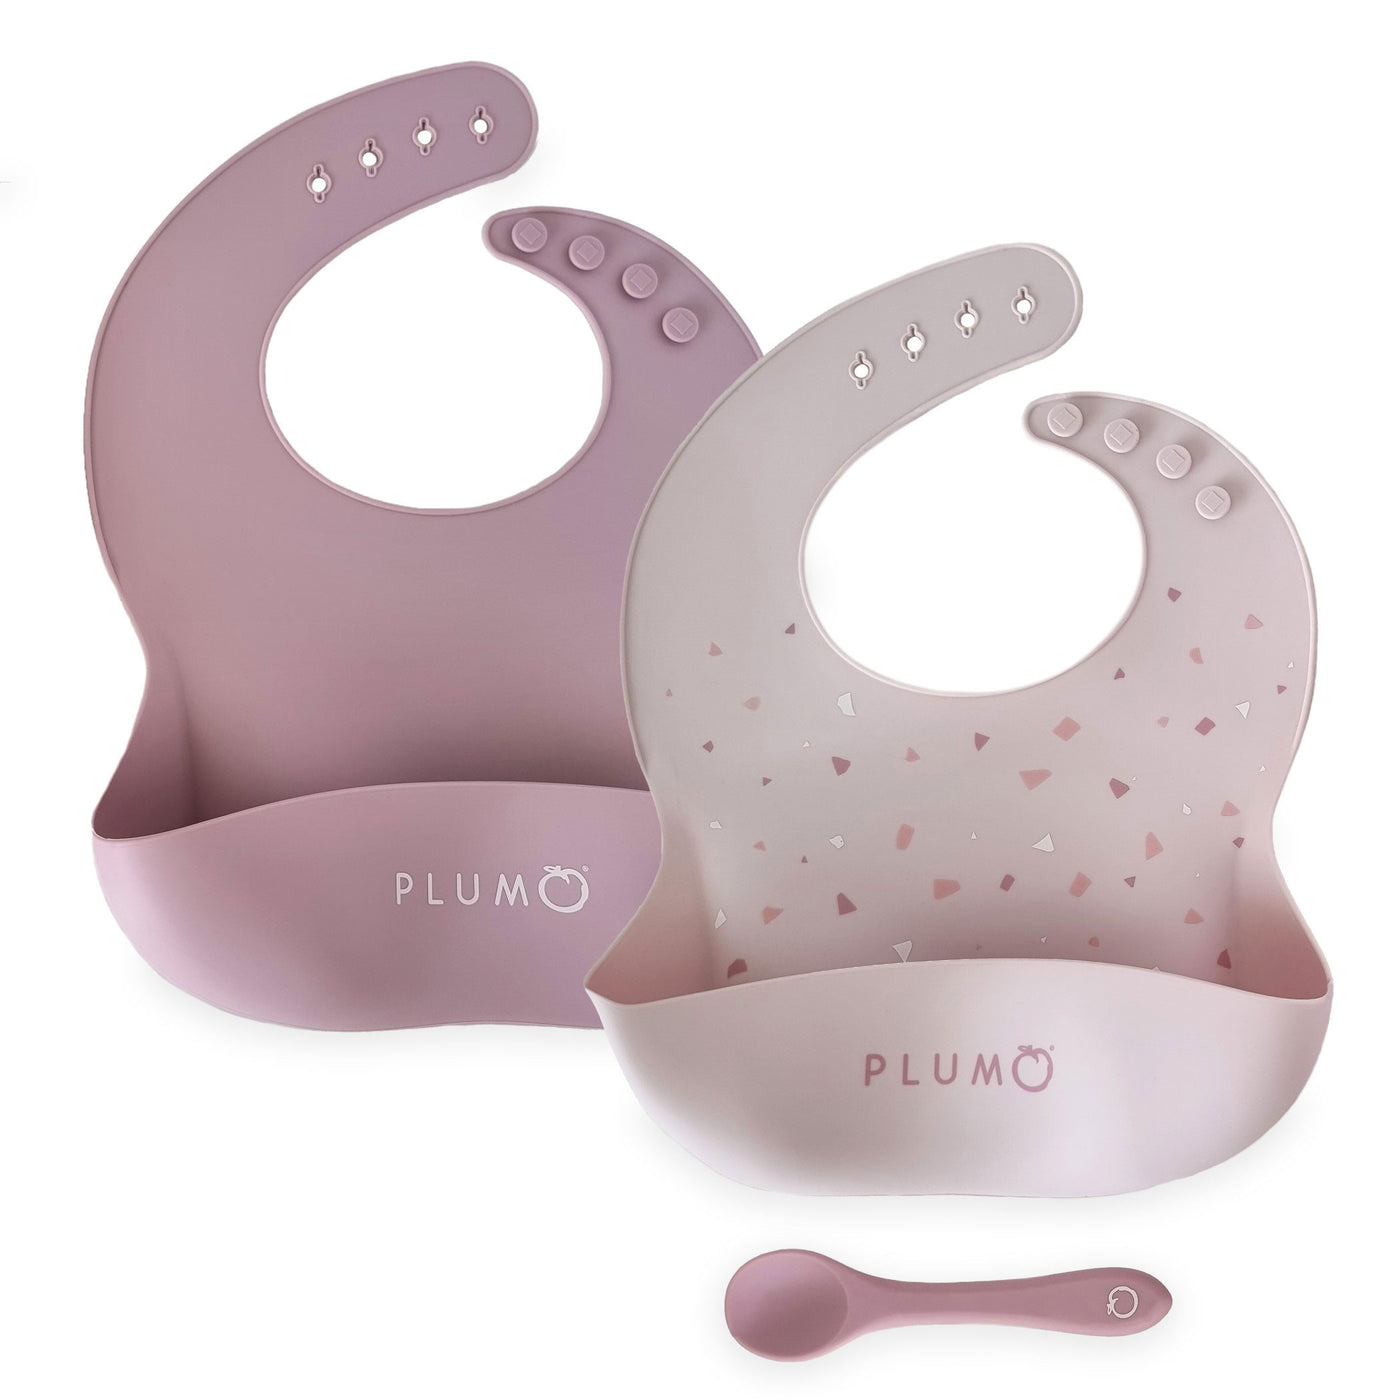 PLUM 3 Piece Silicone Bib and Spoon Set - Dusty Berry/Blush Pink